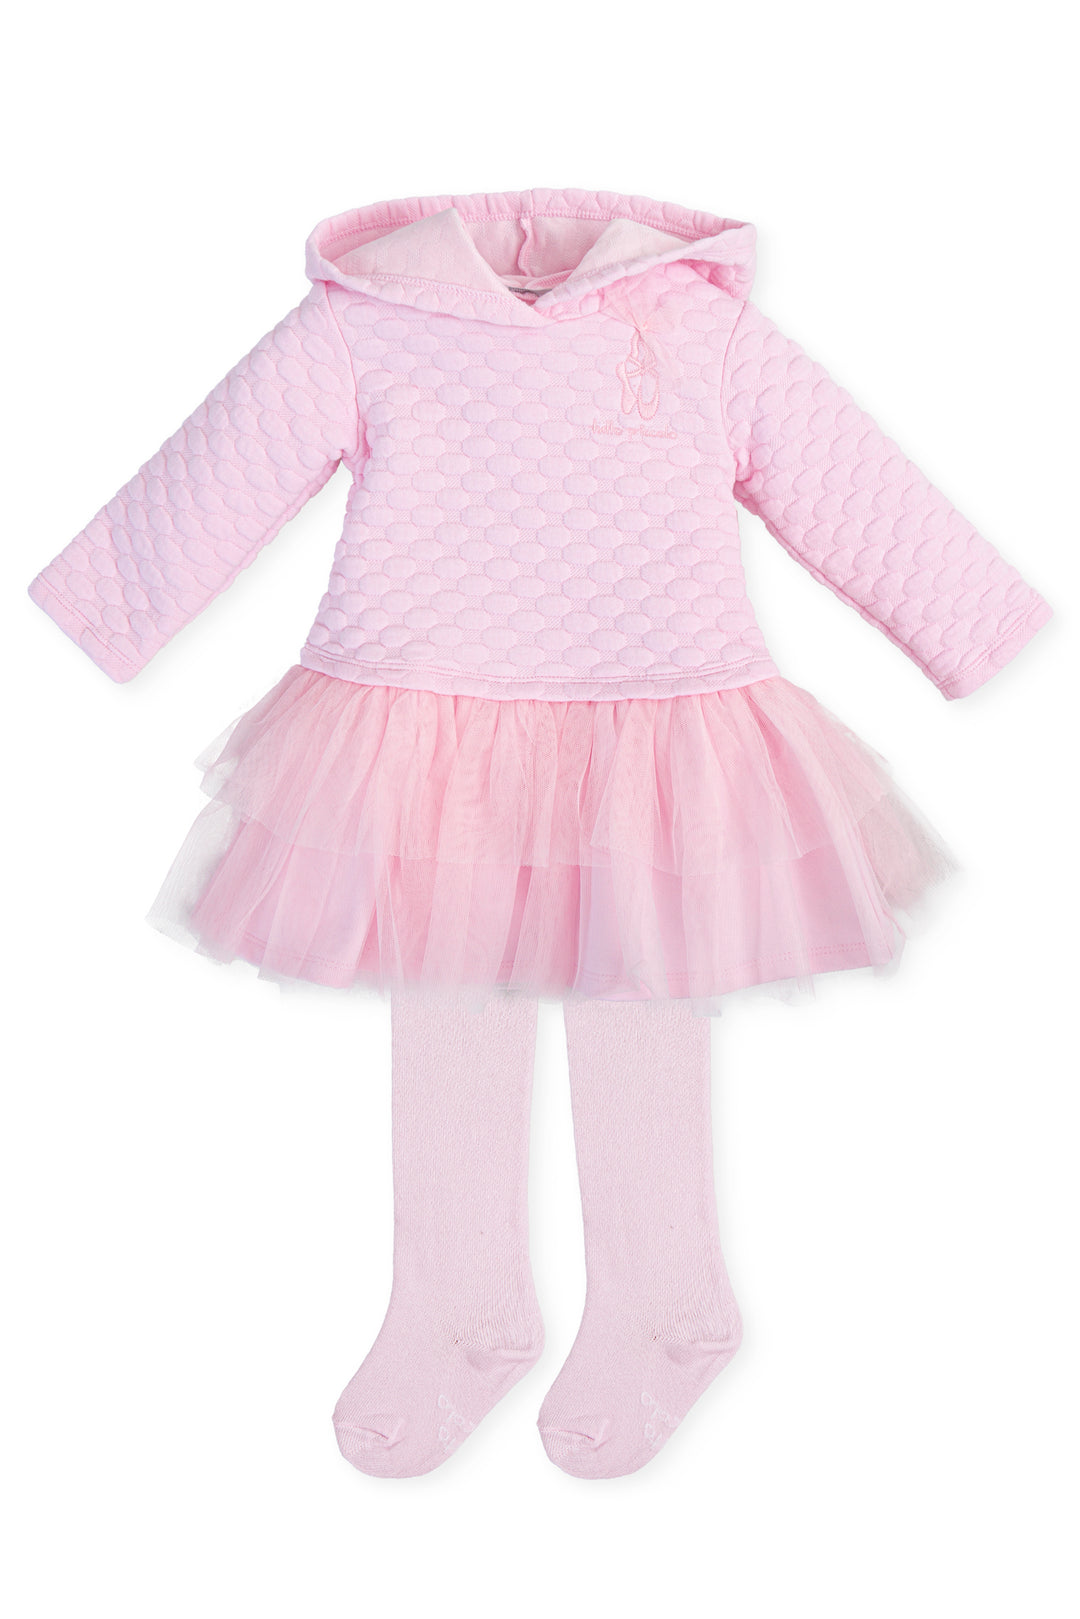 Tutto Piccolo "Adeline" Pink Tutu Hoodie Dress & Tights | Millie and John